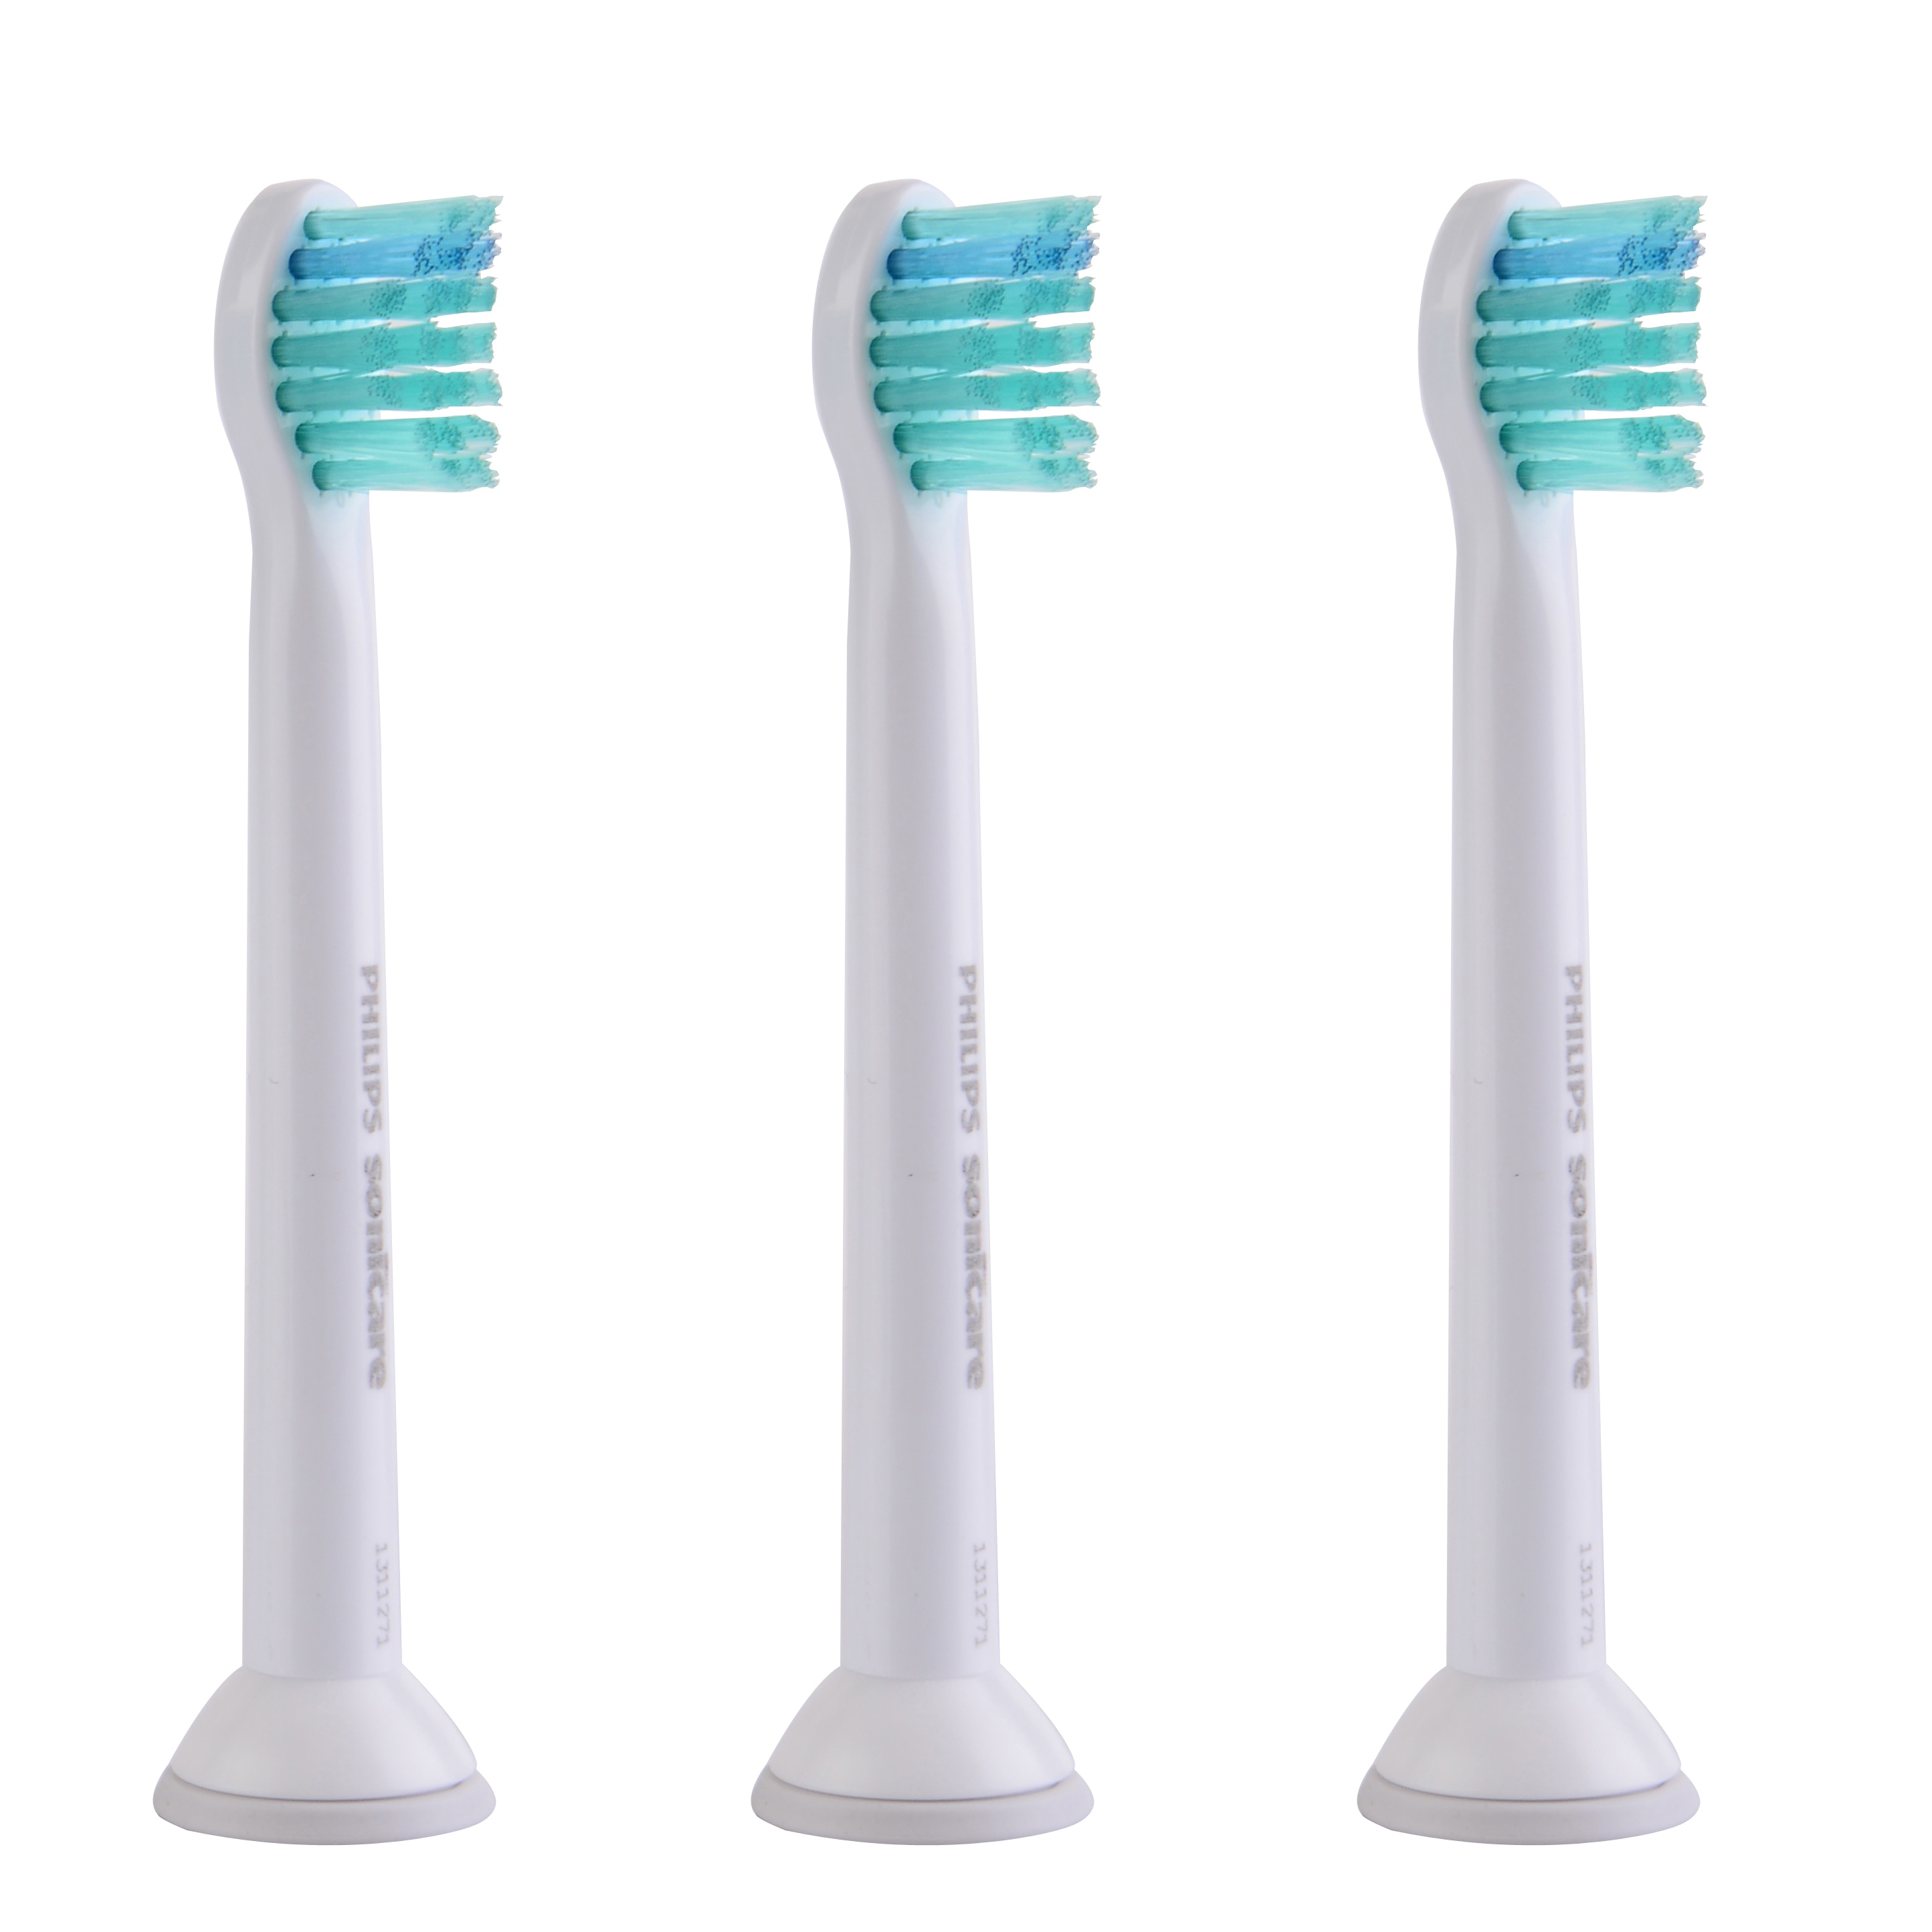 sonicare brush heads coming off